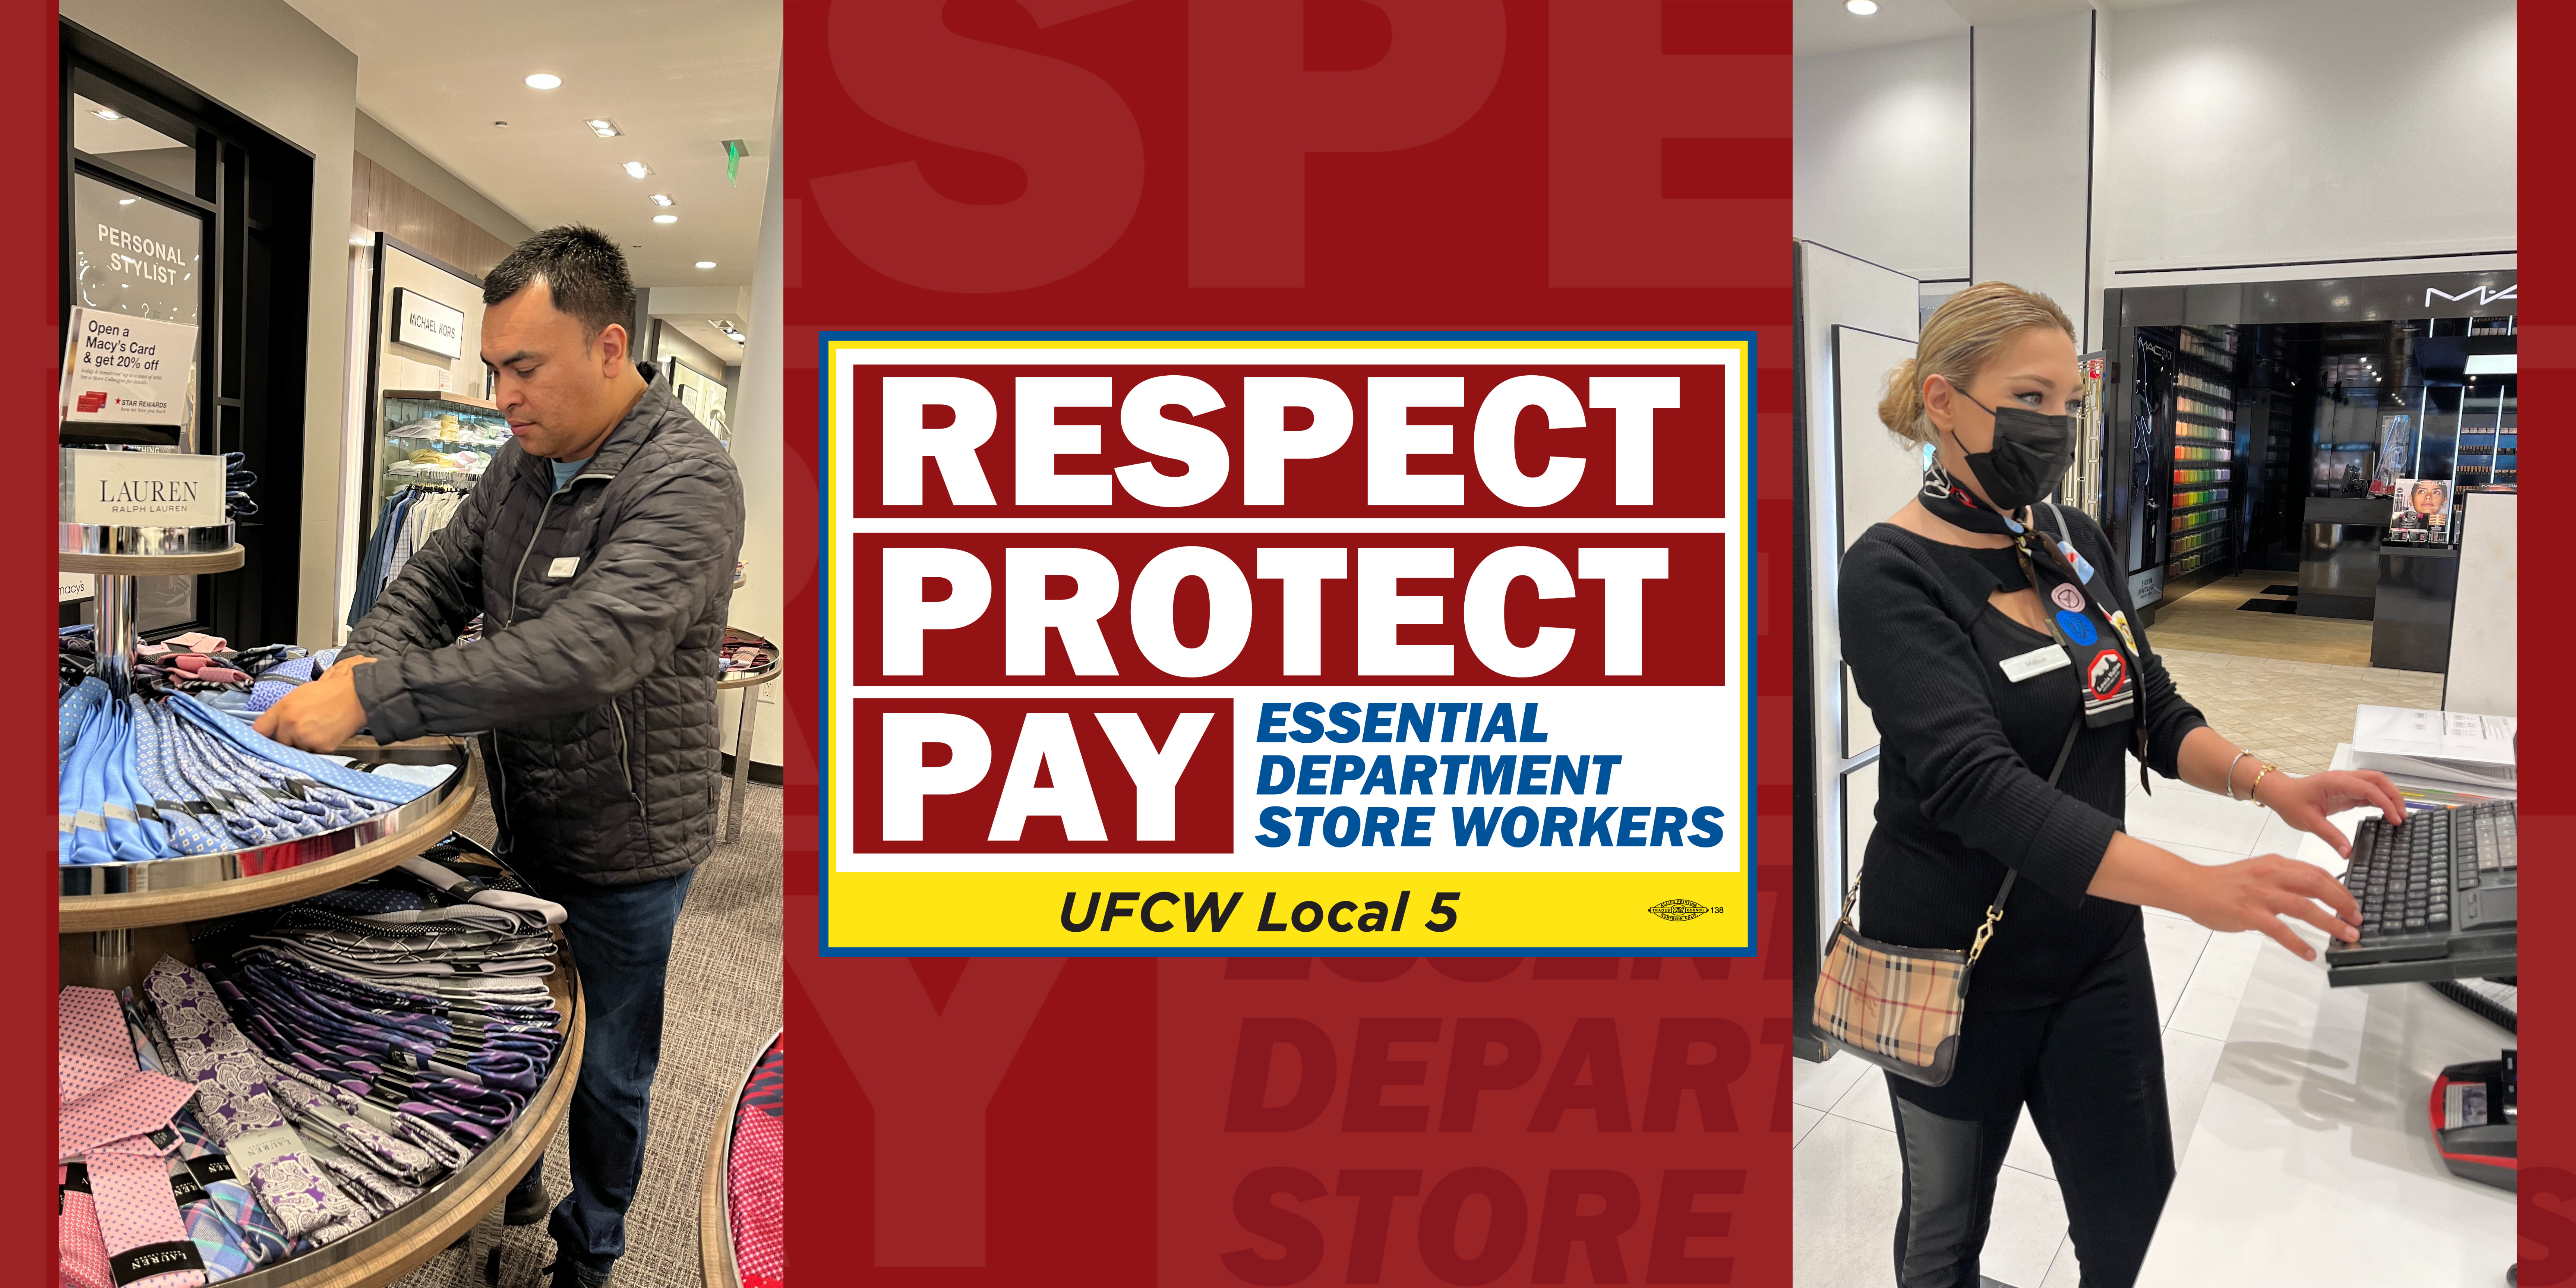 Respect Protect Pay placard between two workers